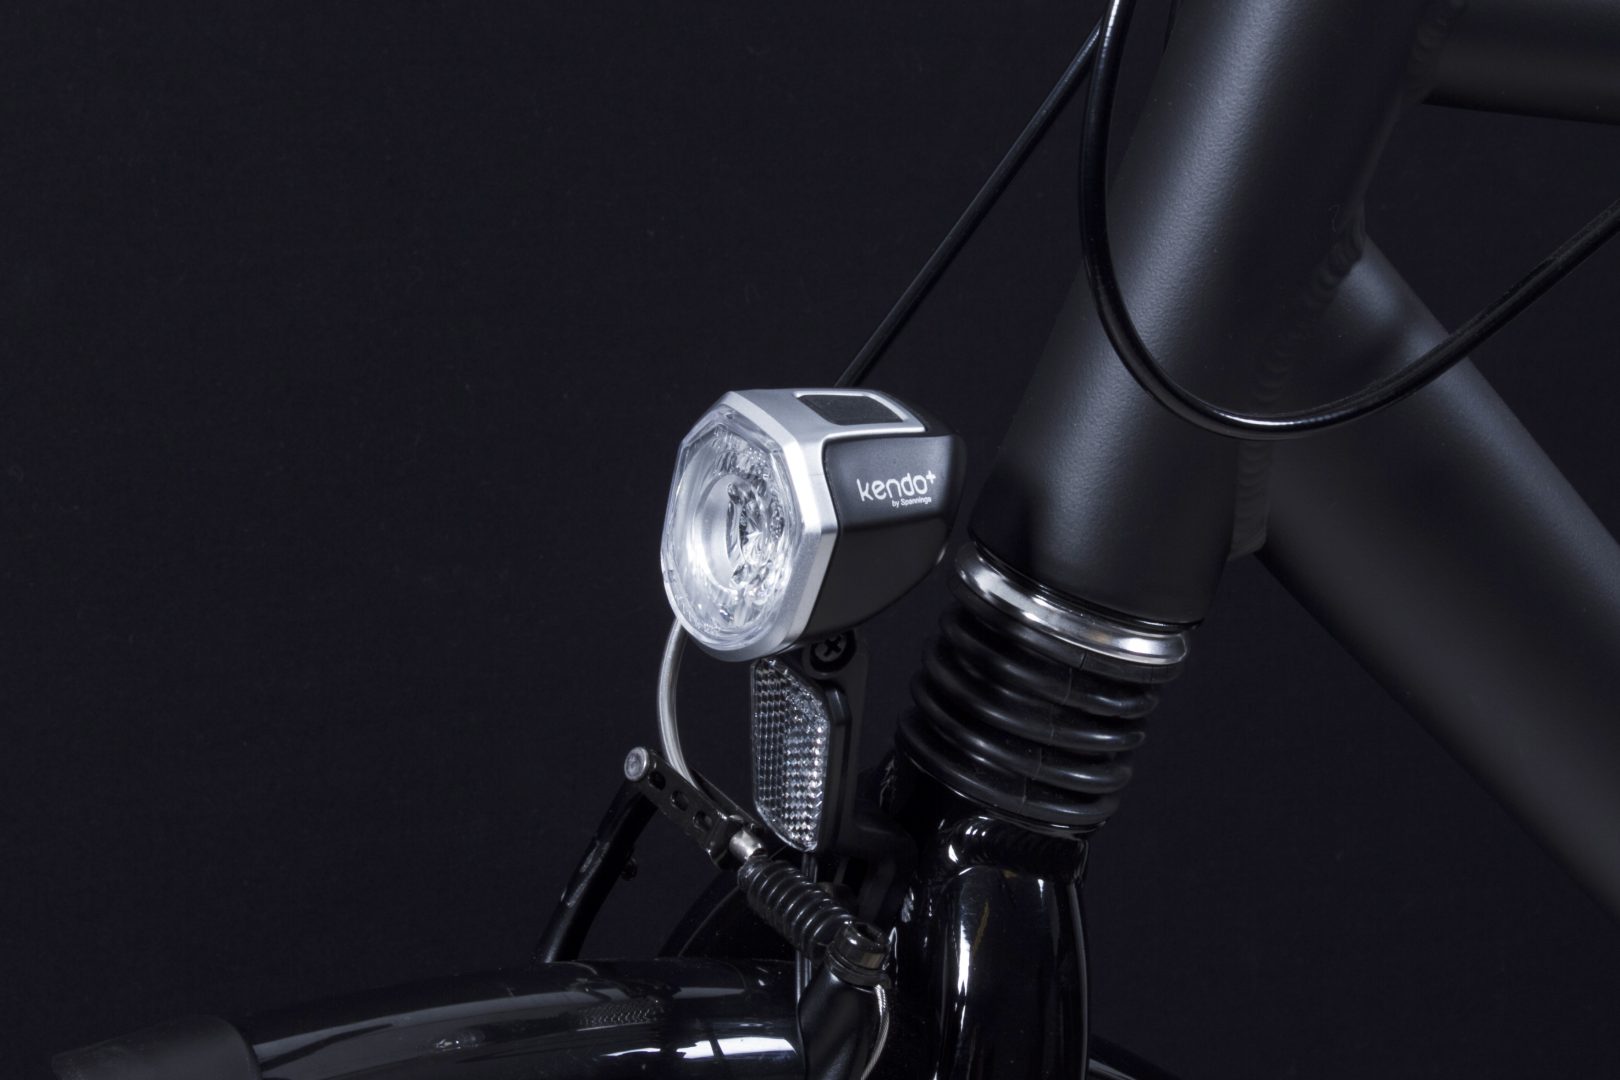 Kendo+ headlamp on front fork with Rw 11 reflector